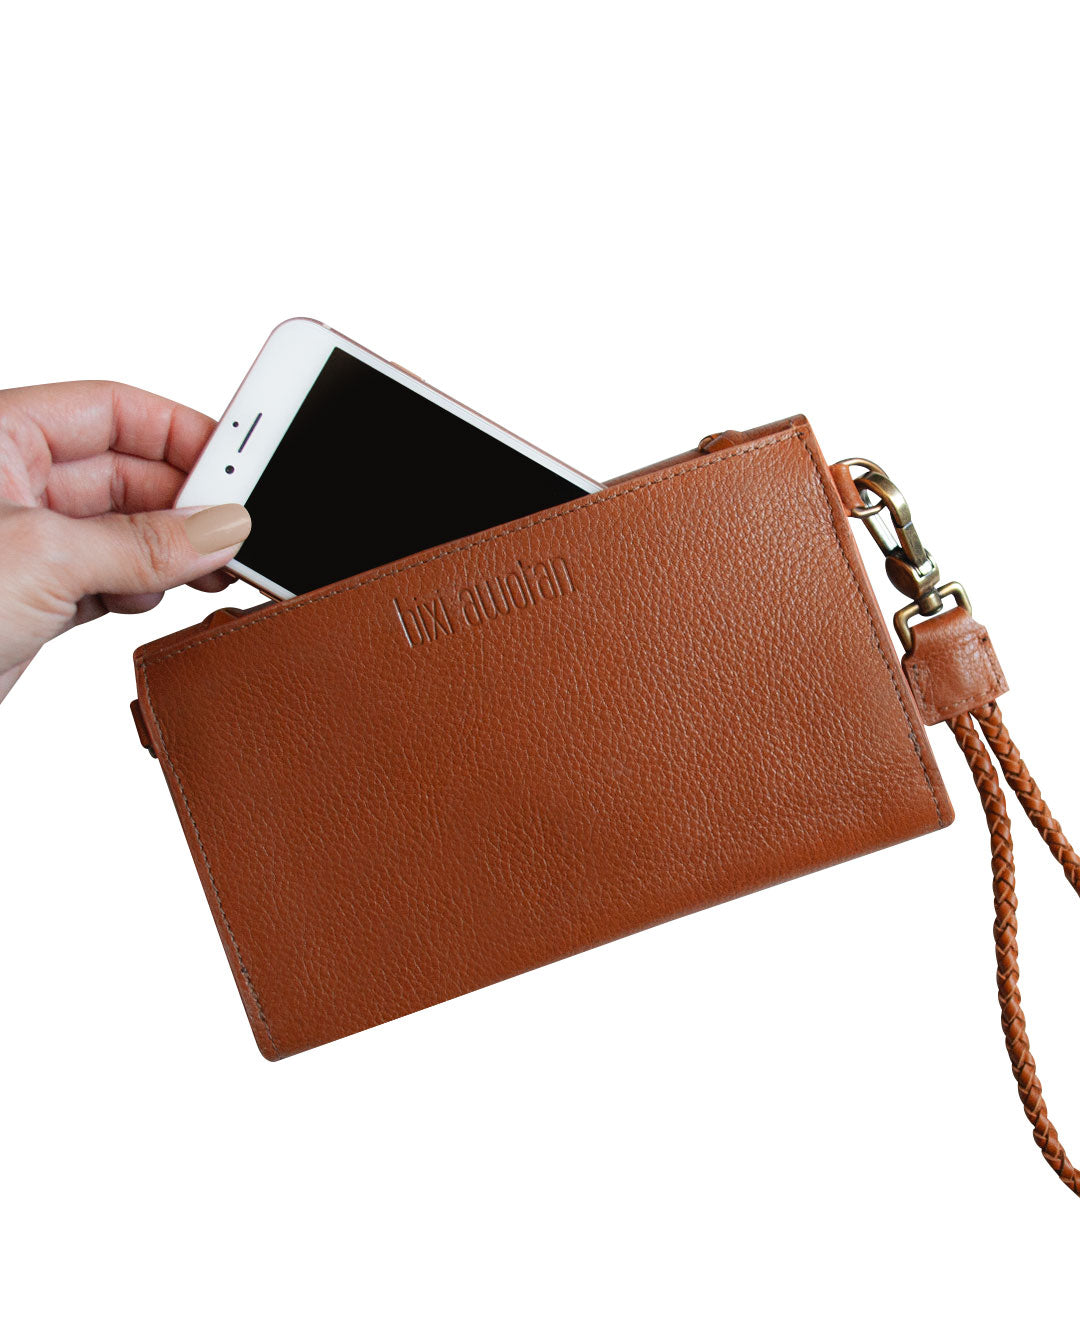 wristlet wallet with strap full grain leather bifold